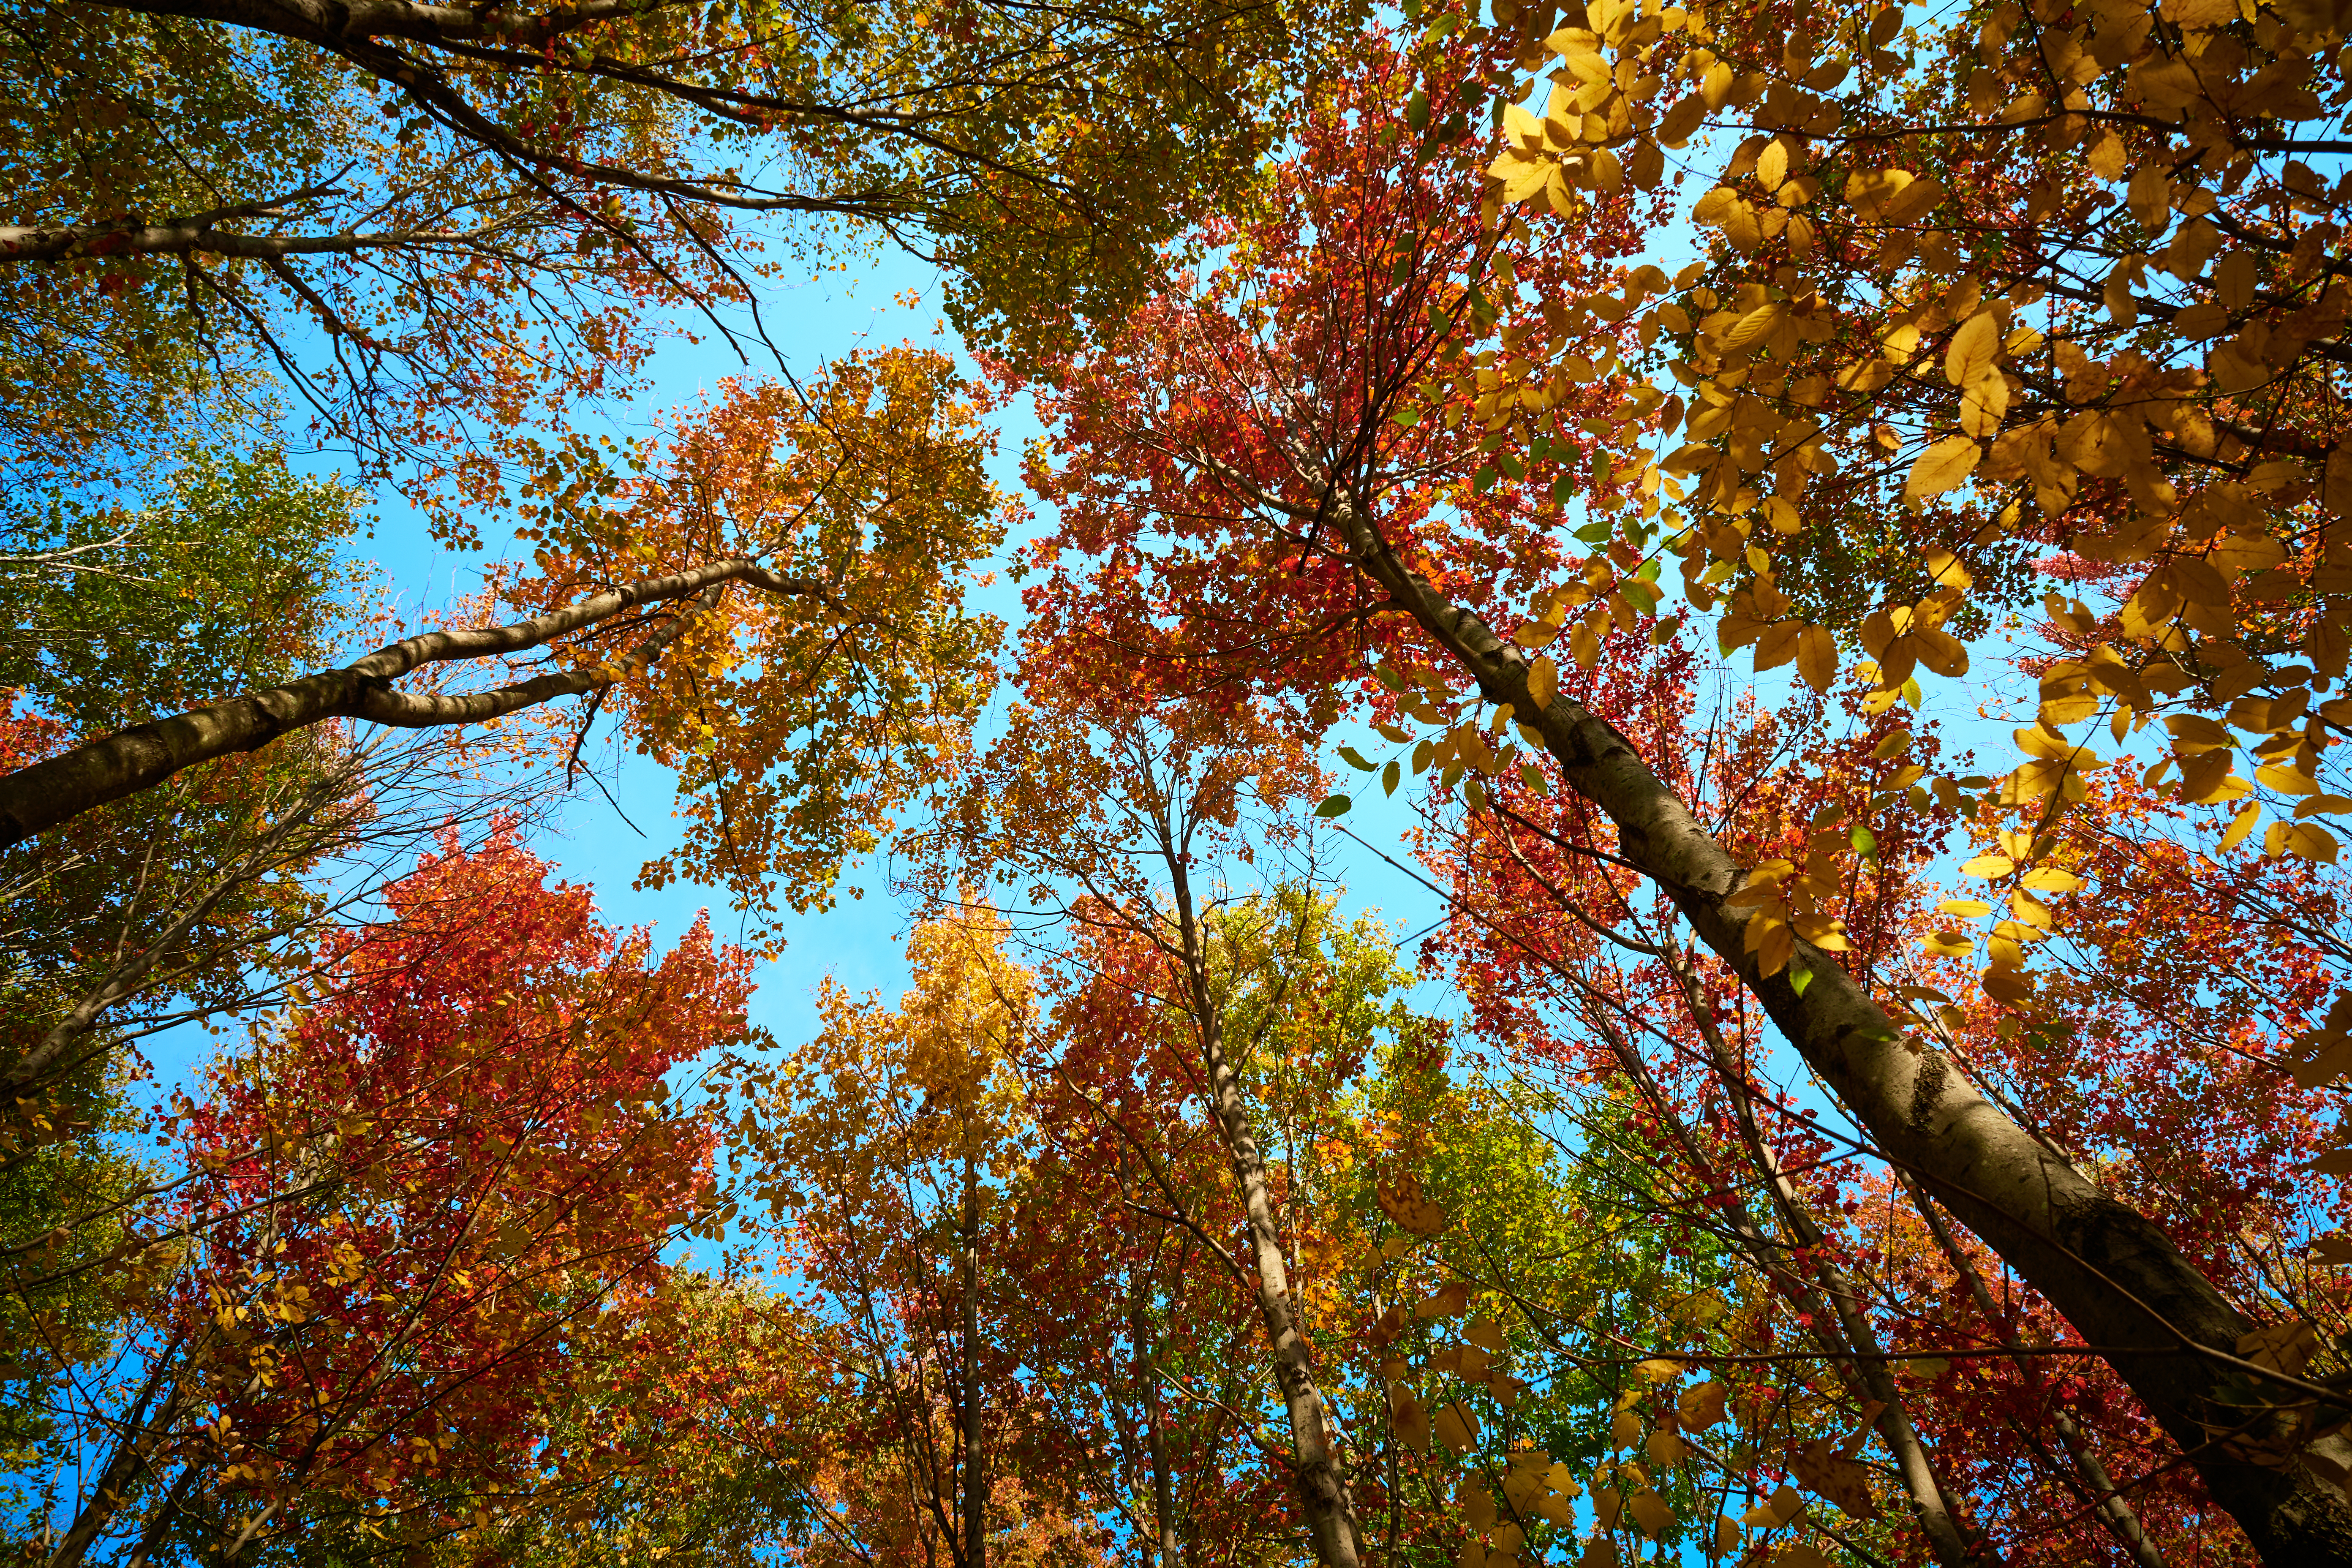 Autumn leaves on the tree tops